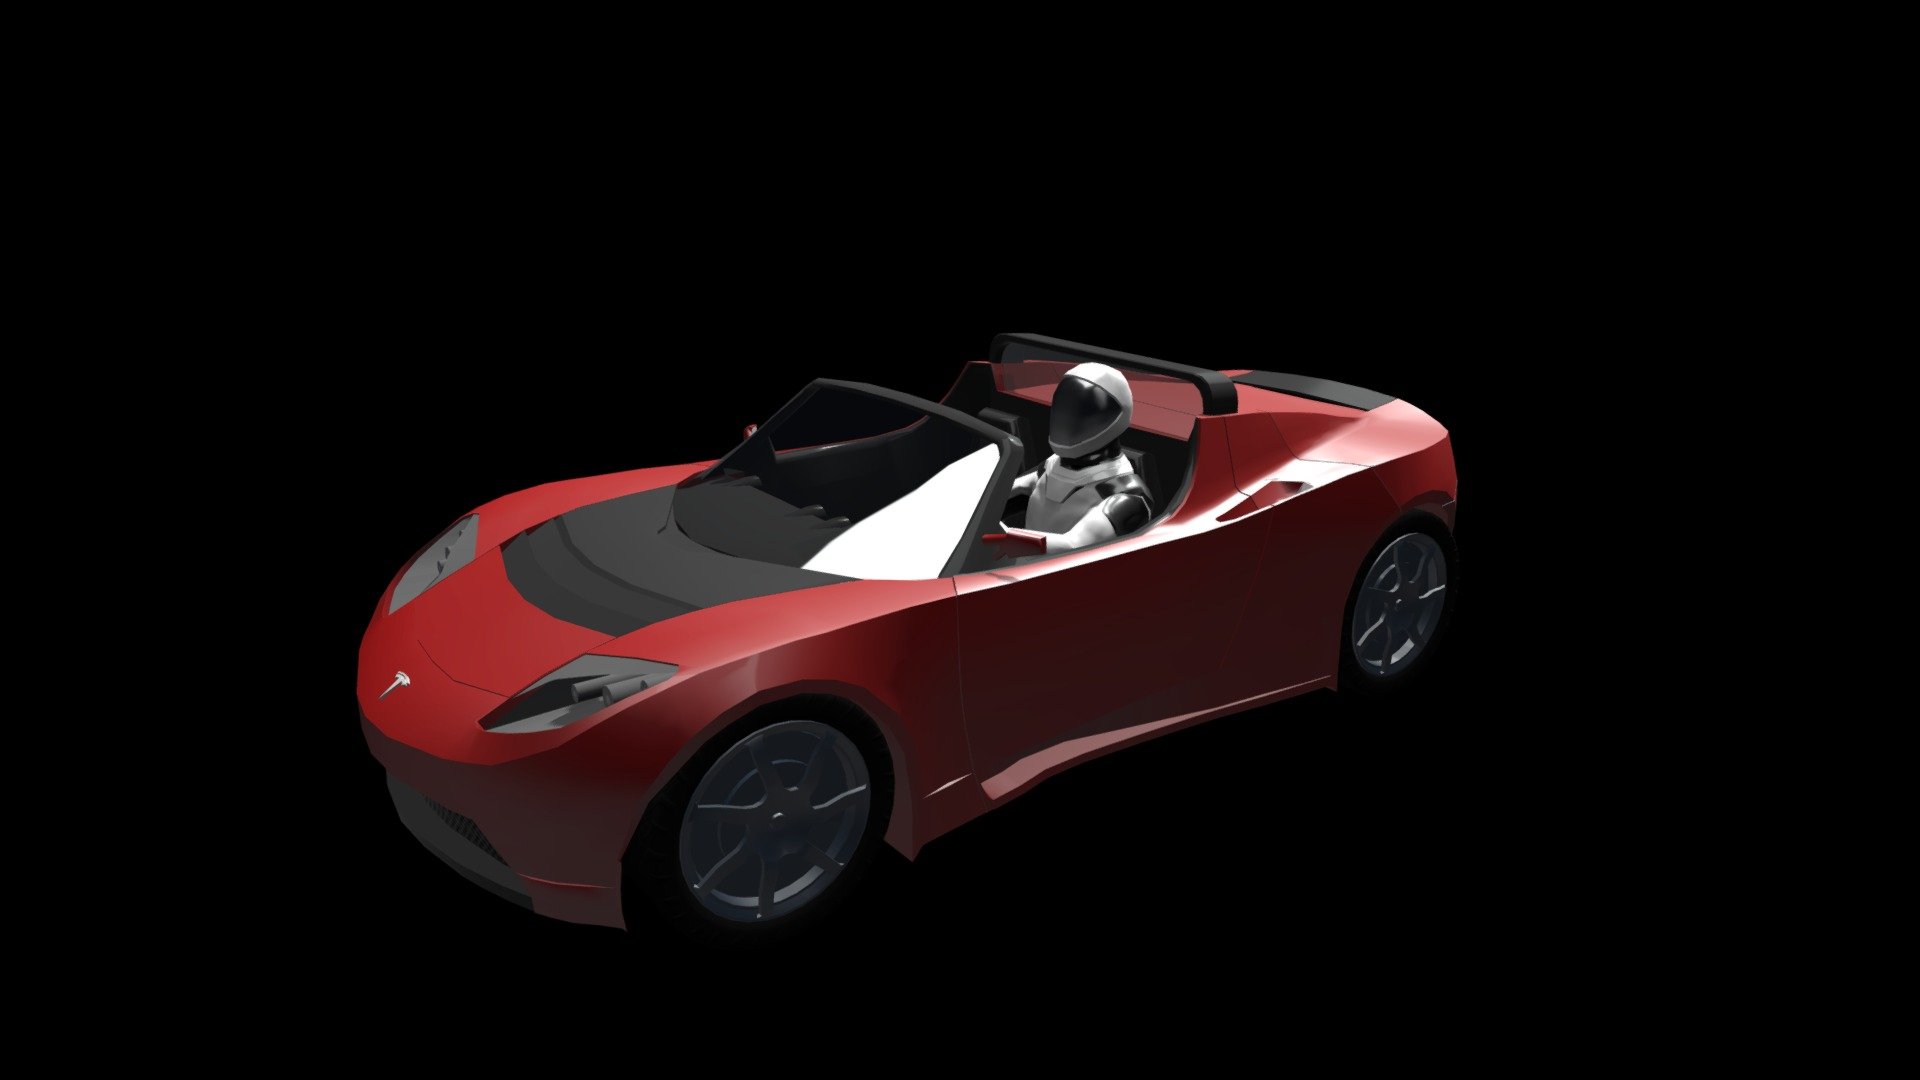 Elon Musk's Tesla Roadster is an electric sports car that served as the dummy payload for the February 2018 Falcon Heavy test flight and is now an artificial satellite of the Sun. &ldquo;Starman